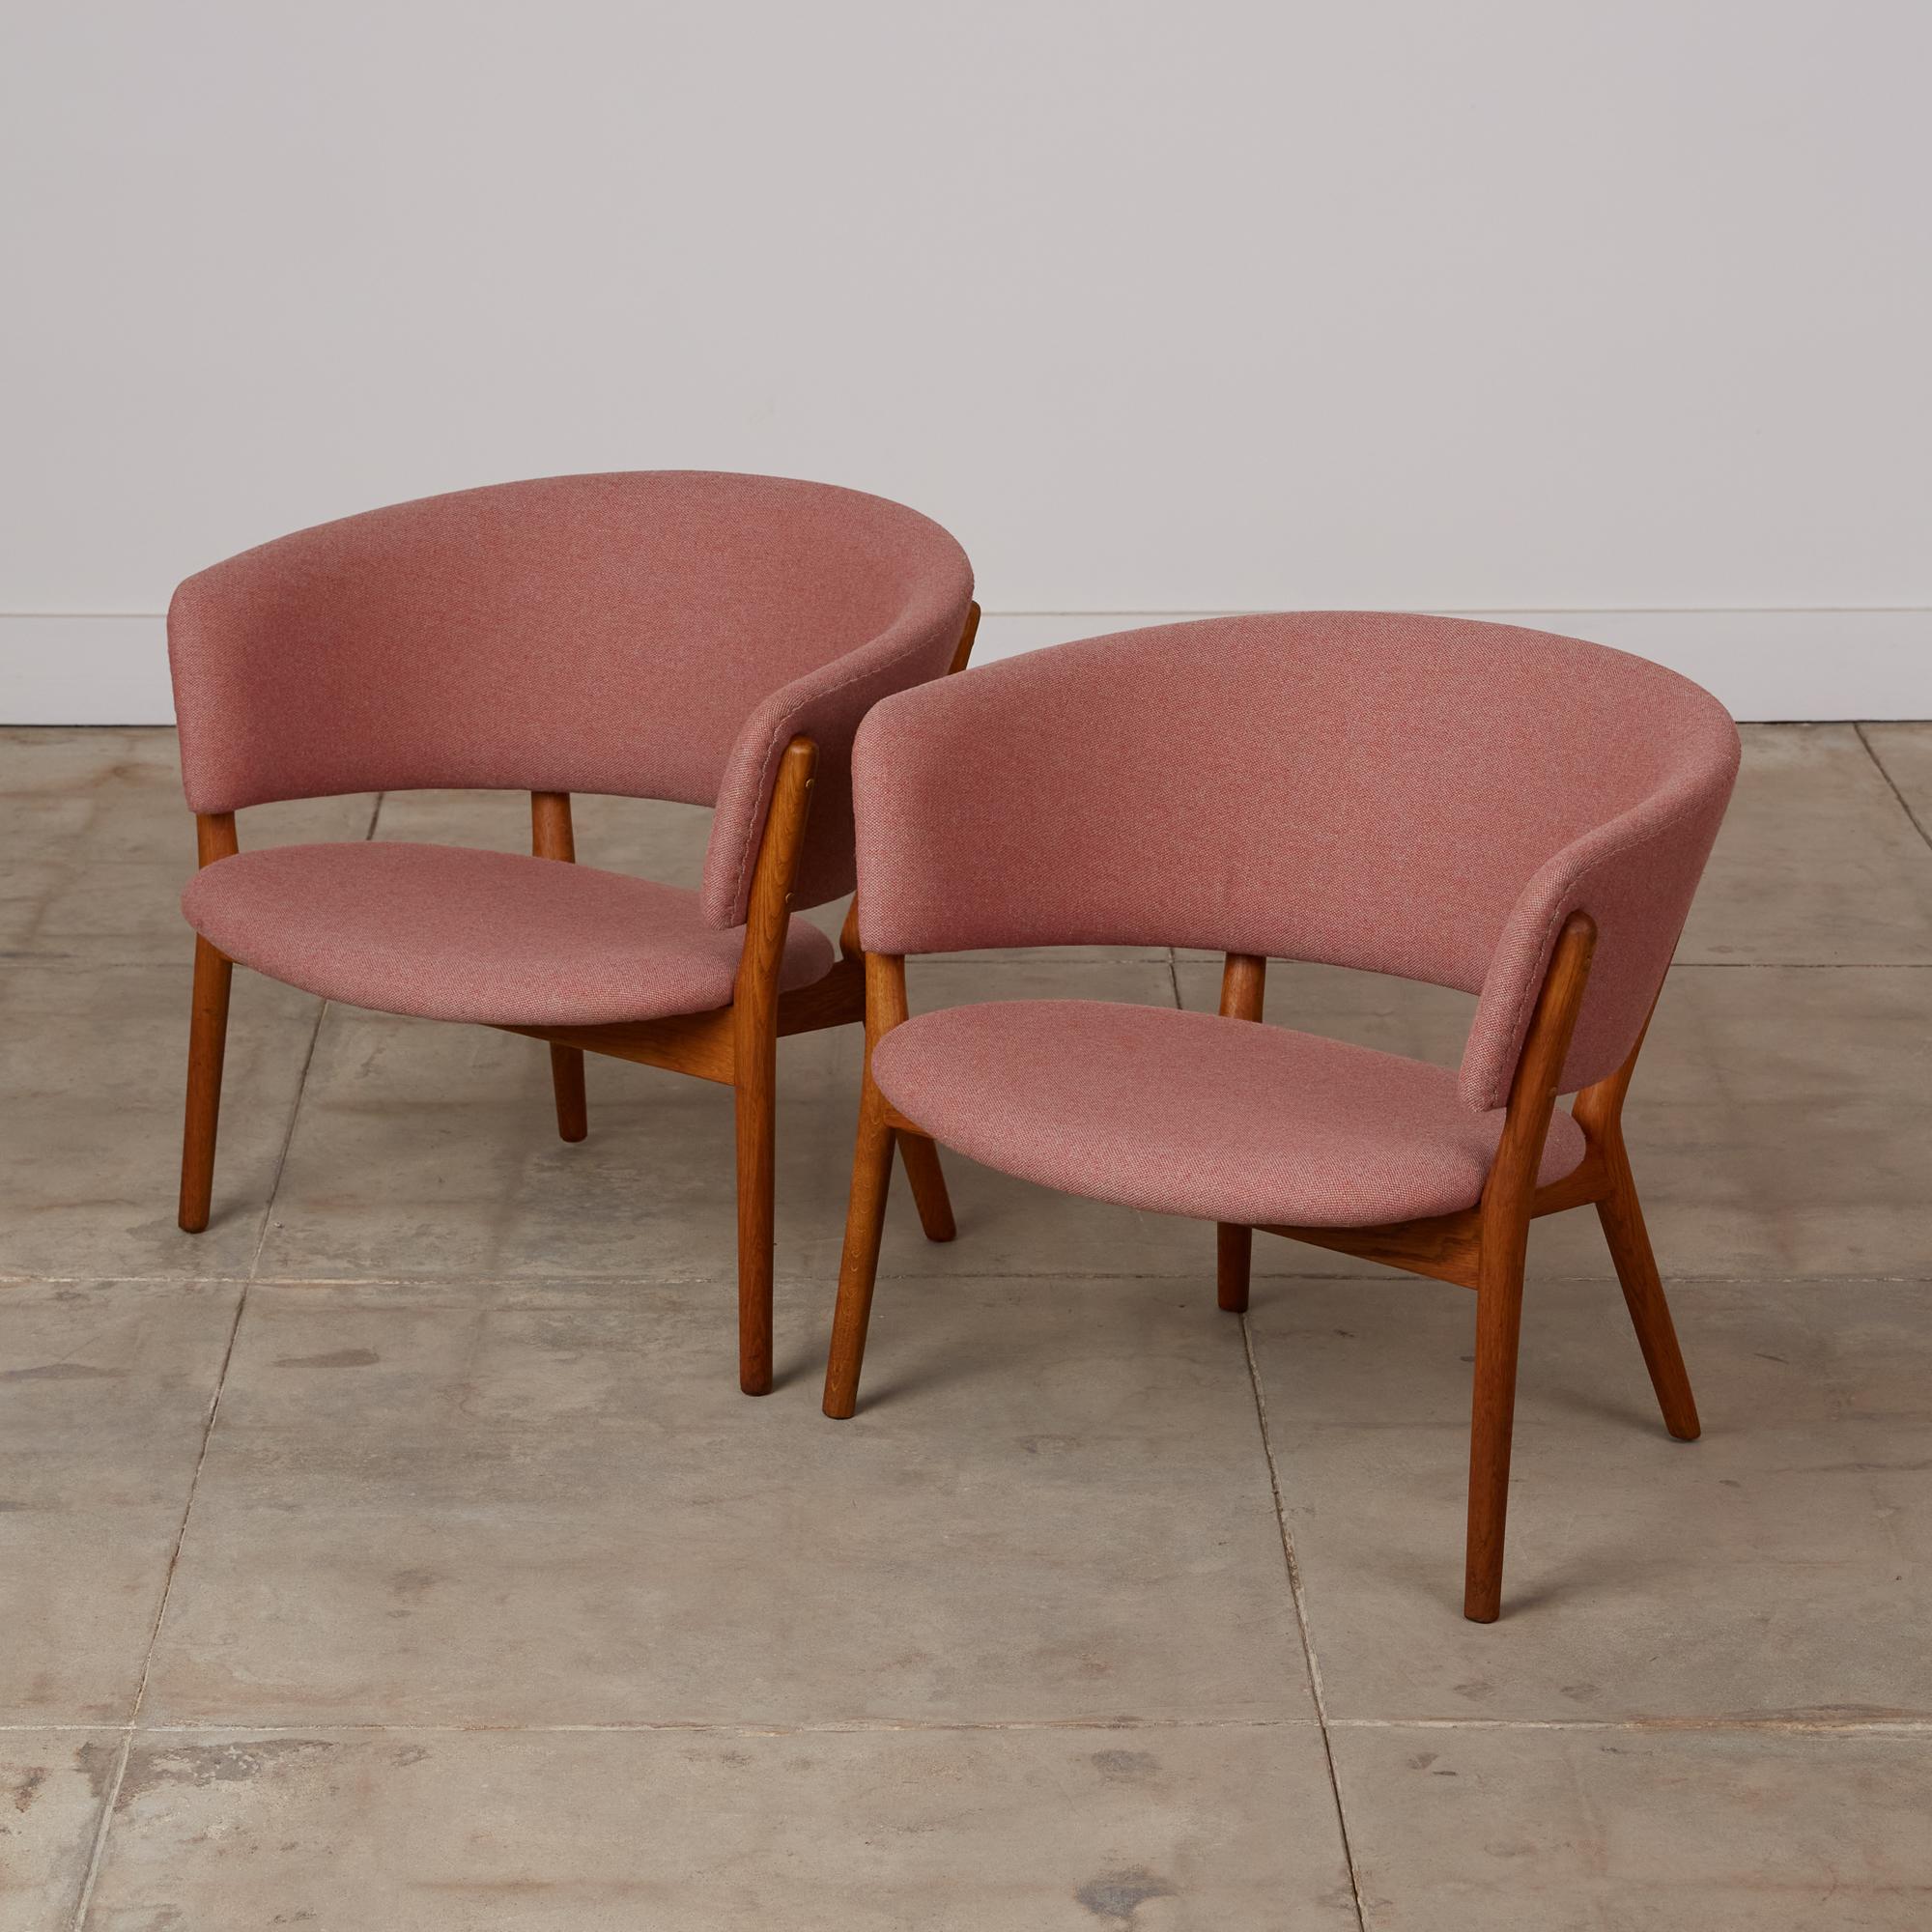 Pair of Nanna Ditzel ND83 lounge chairs for Søren Willadsen, Denmark, c.1950s. These 1952-designed chairs by Ditzel feature oak frames and back supports that connect to the splayed legs. The seats and backs have the original salmon colored tweed